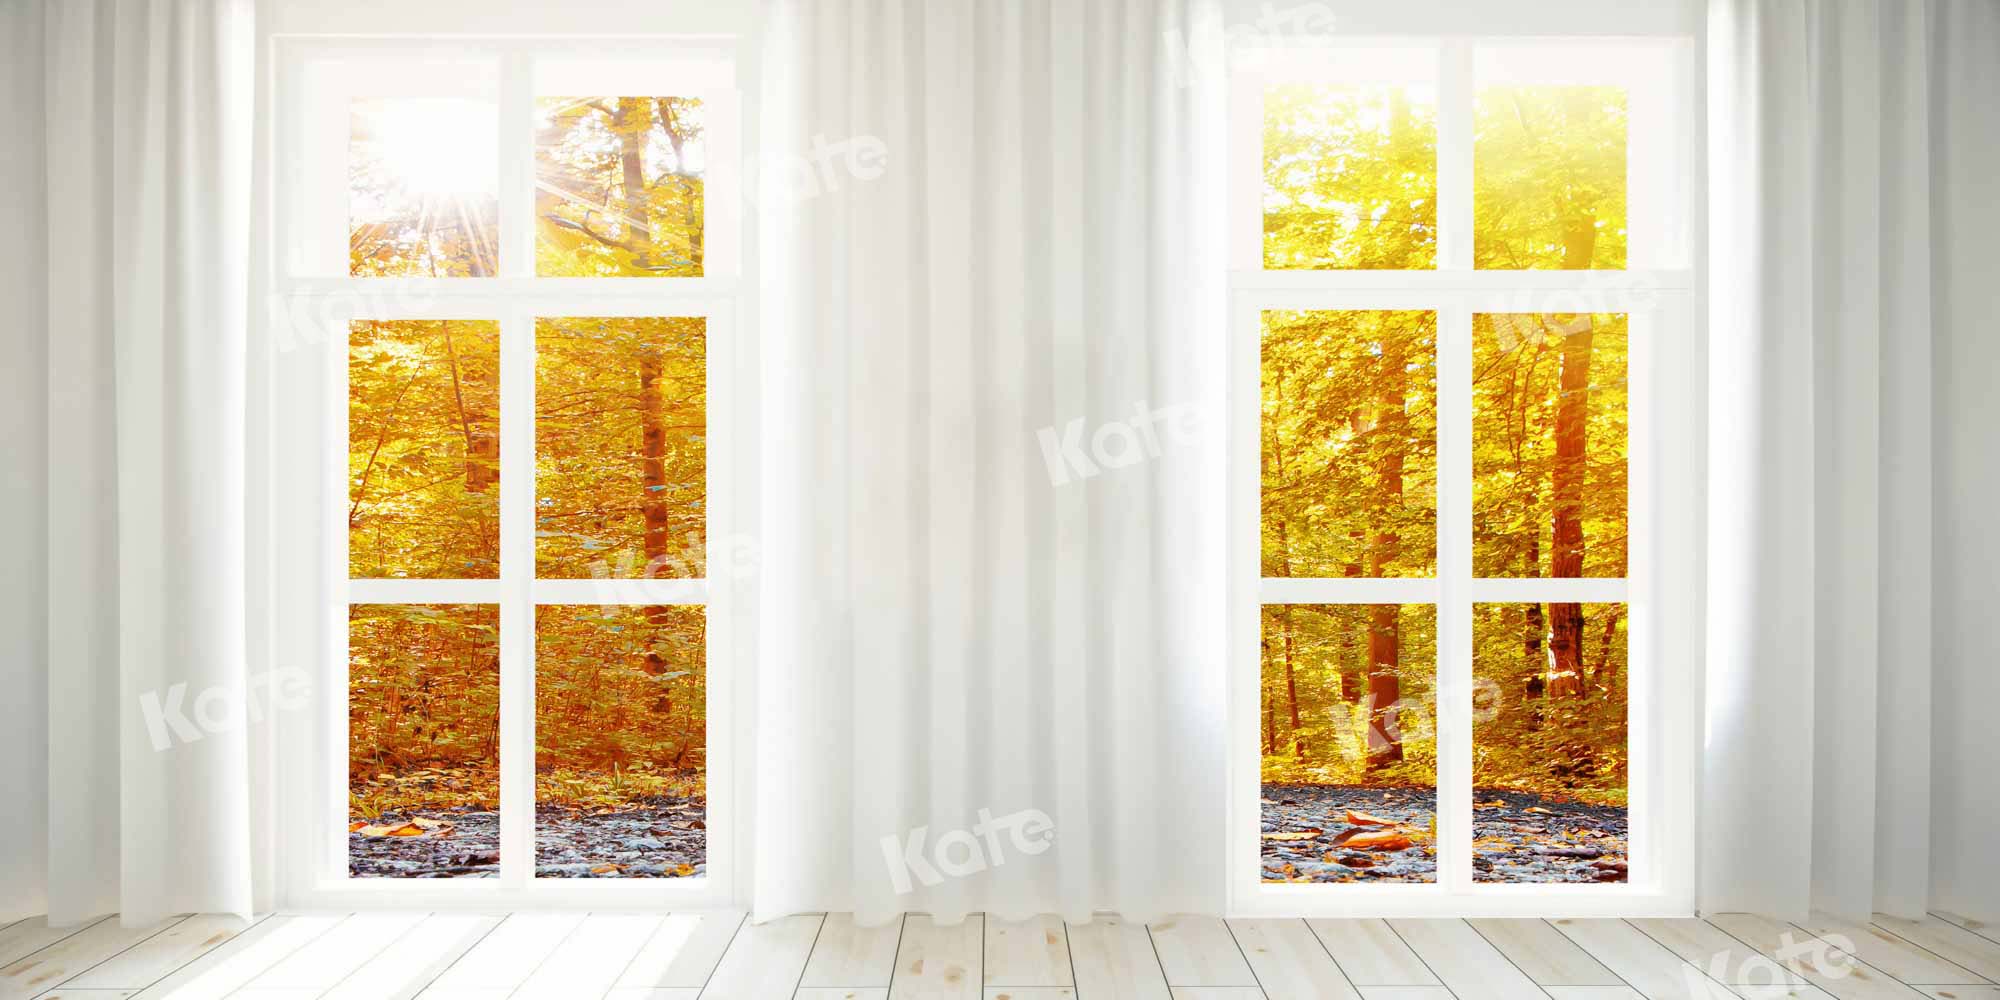 Kate Fall Forest Yellow Door Background for Photography Designed by Chain Photography